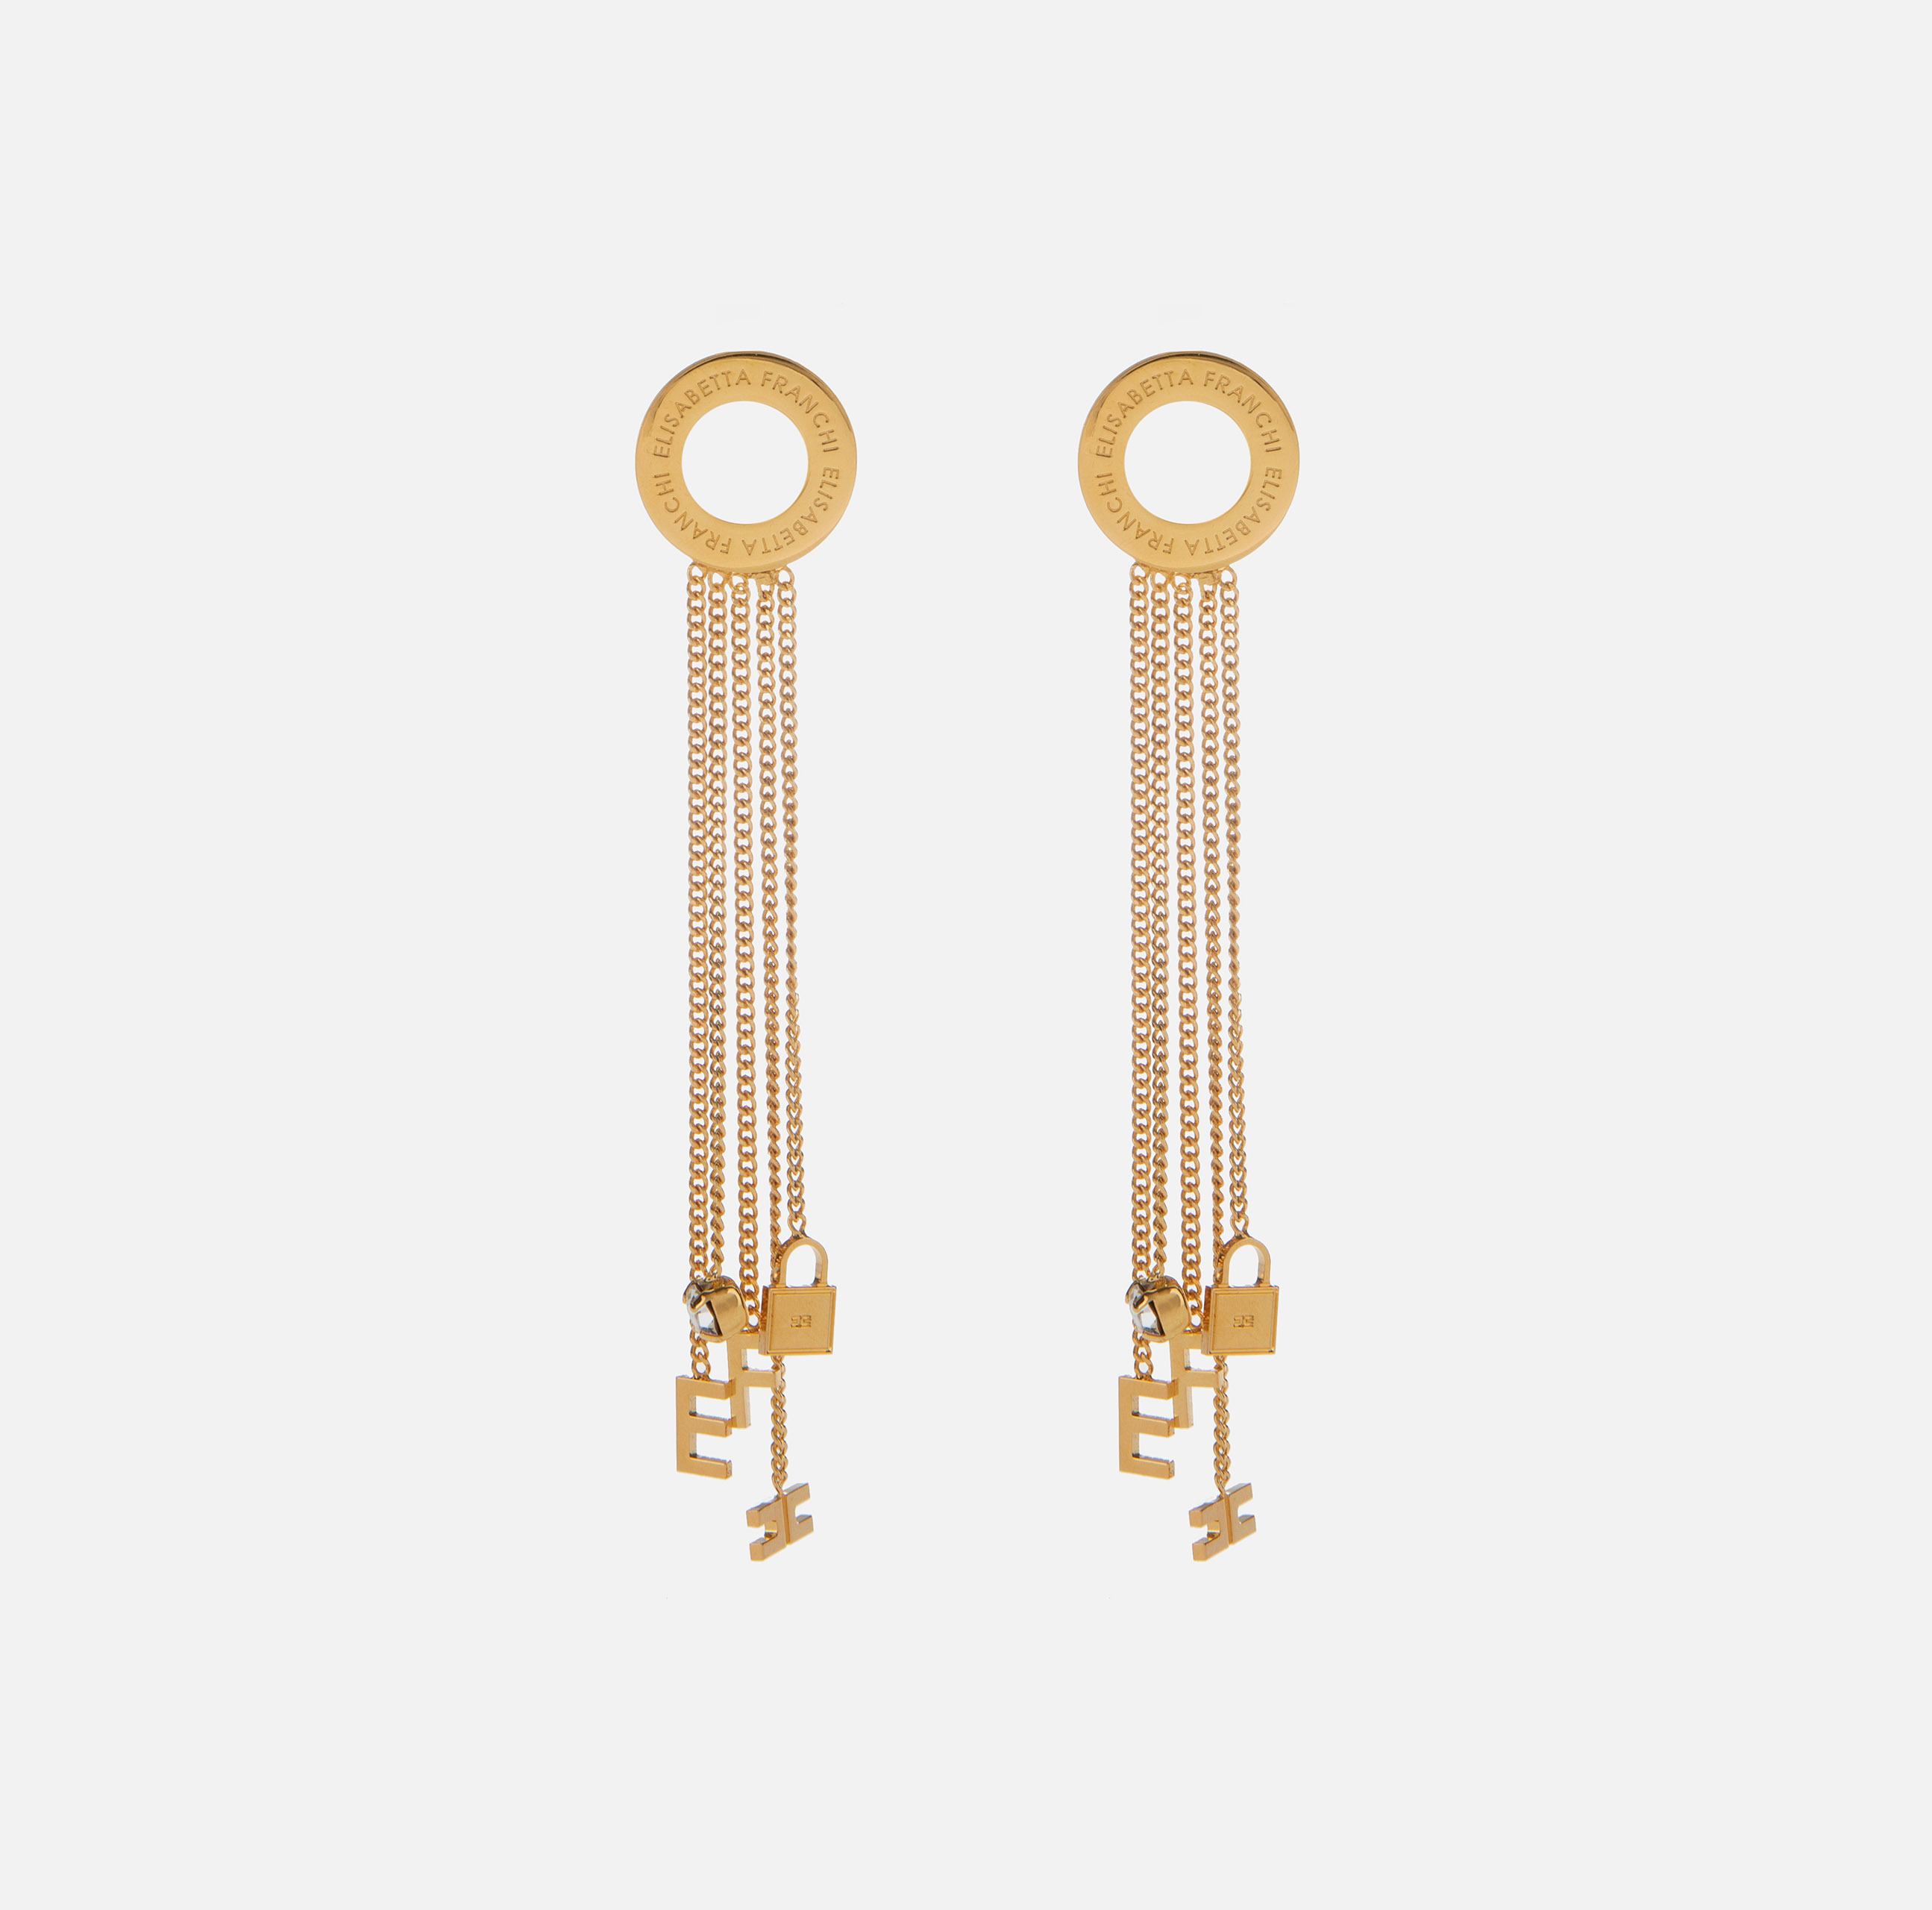 Pendant earrings with tassels and charms - ACCESSORI - Elisabetta Franchi